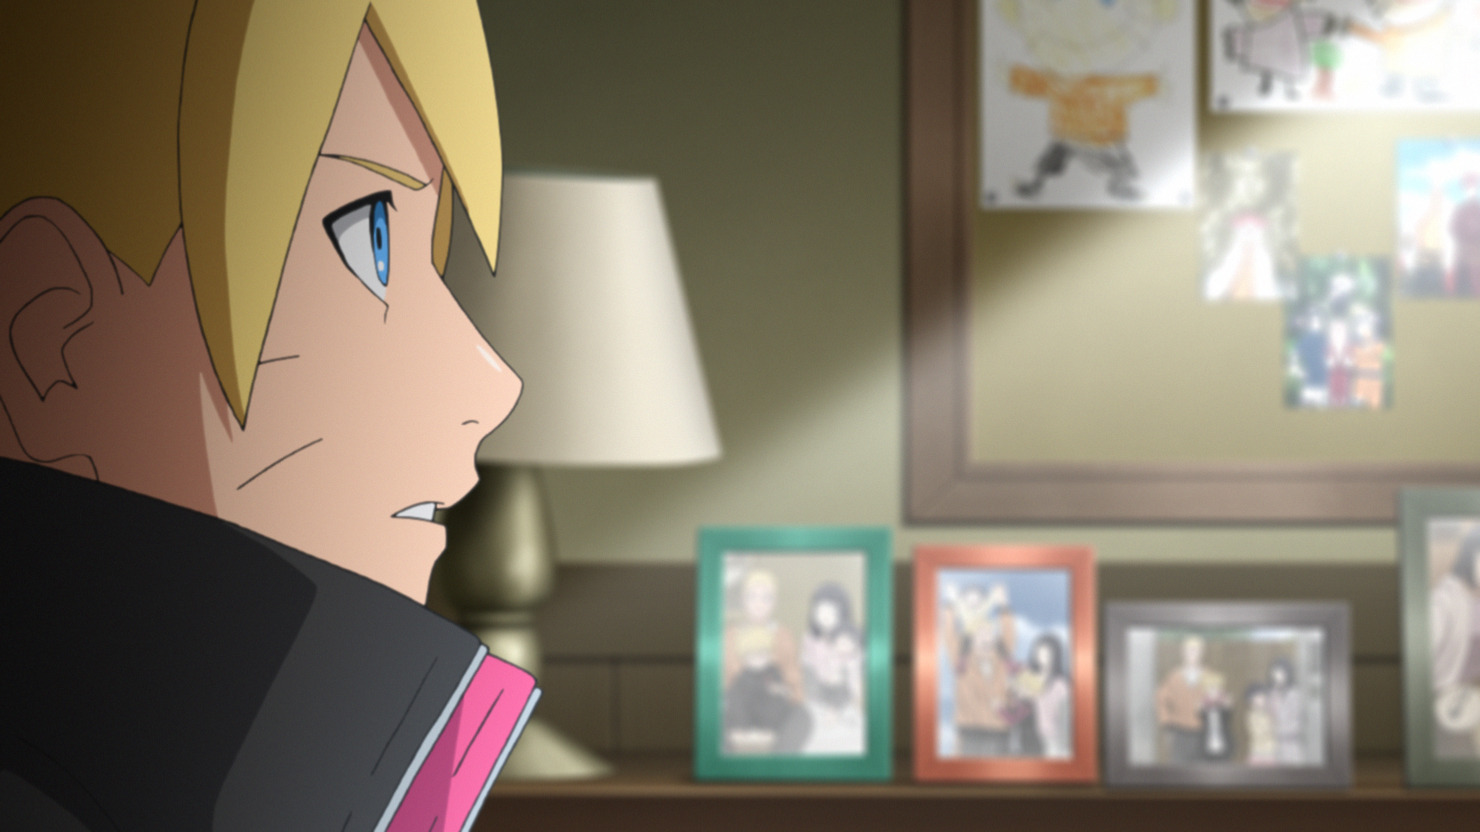 Crunchyroll - FEATURE: BORUTO is a Successful Return to the Small-Stakes  Thrills of Early Naruto